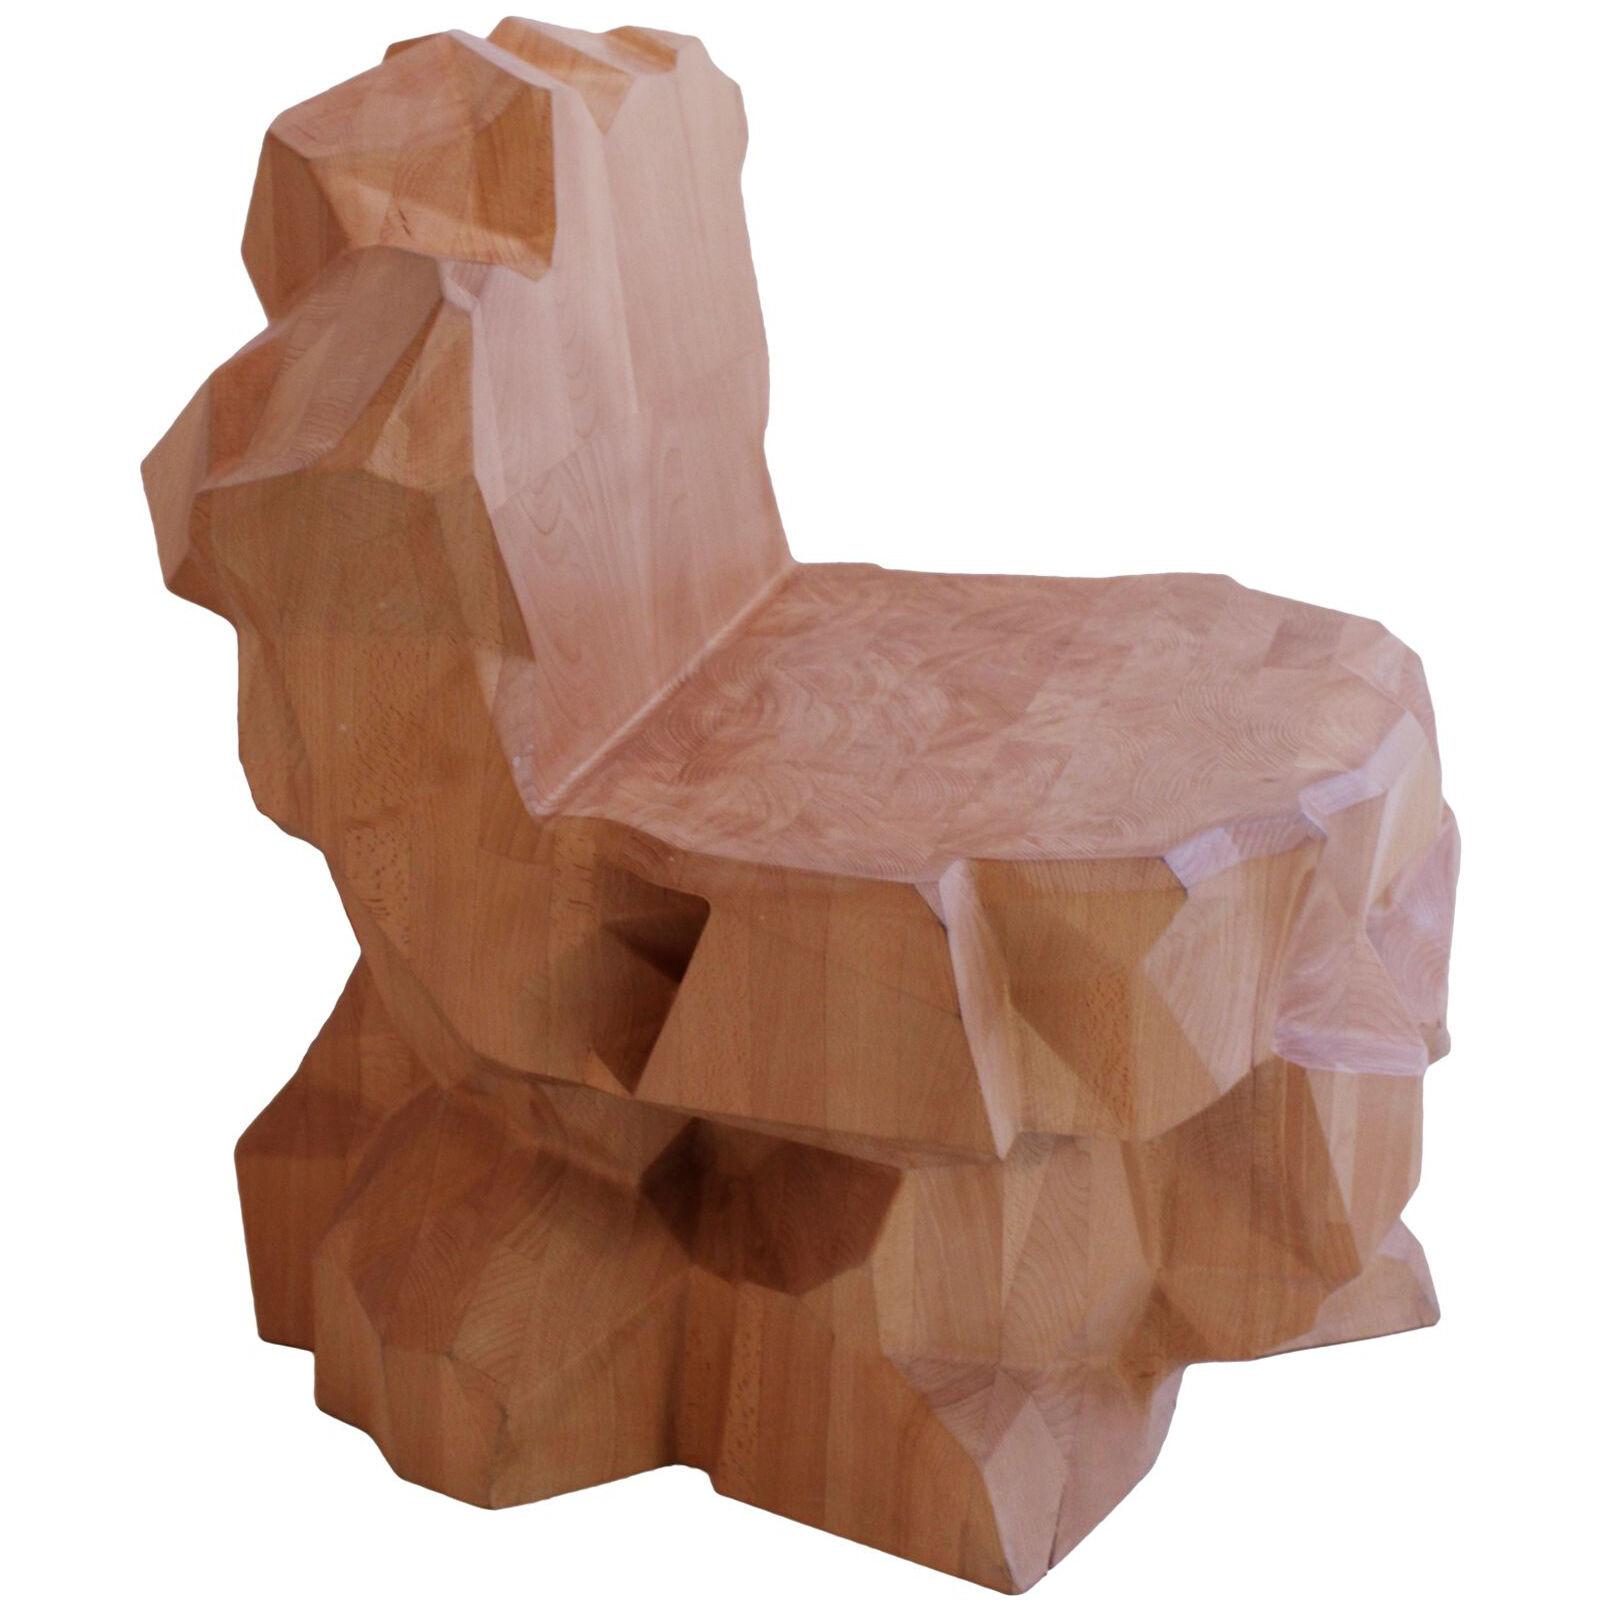 "Mineral" Faceted Sculptural Chair in Wood by Dagoberto Rodriguez